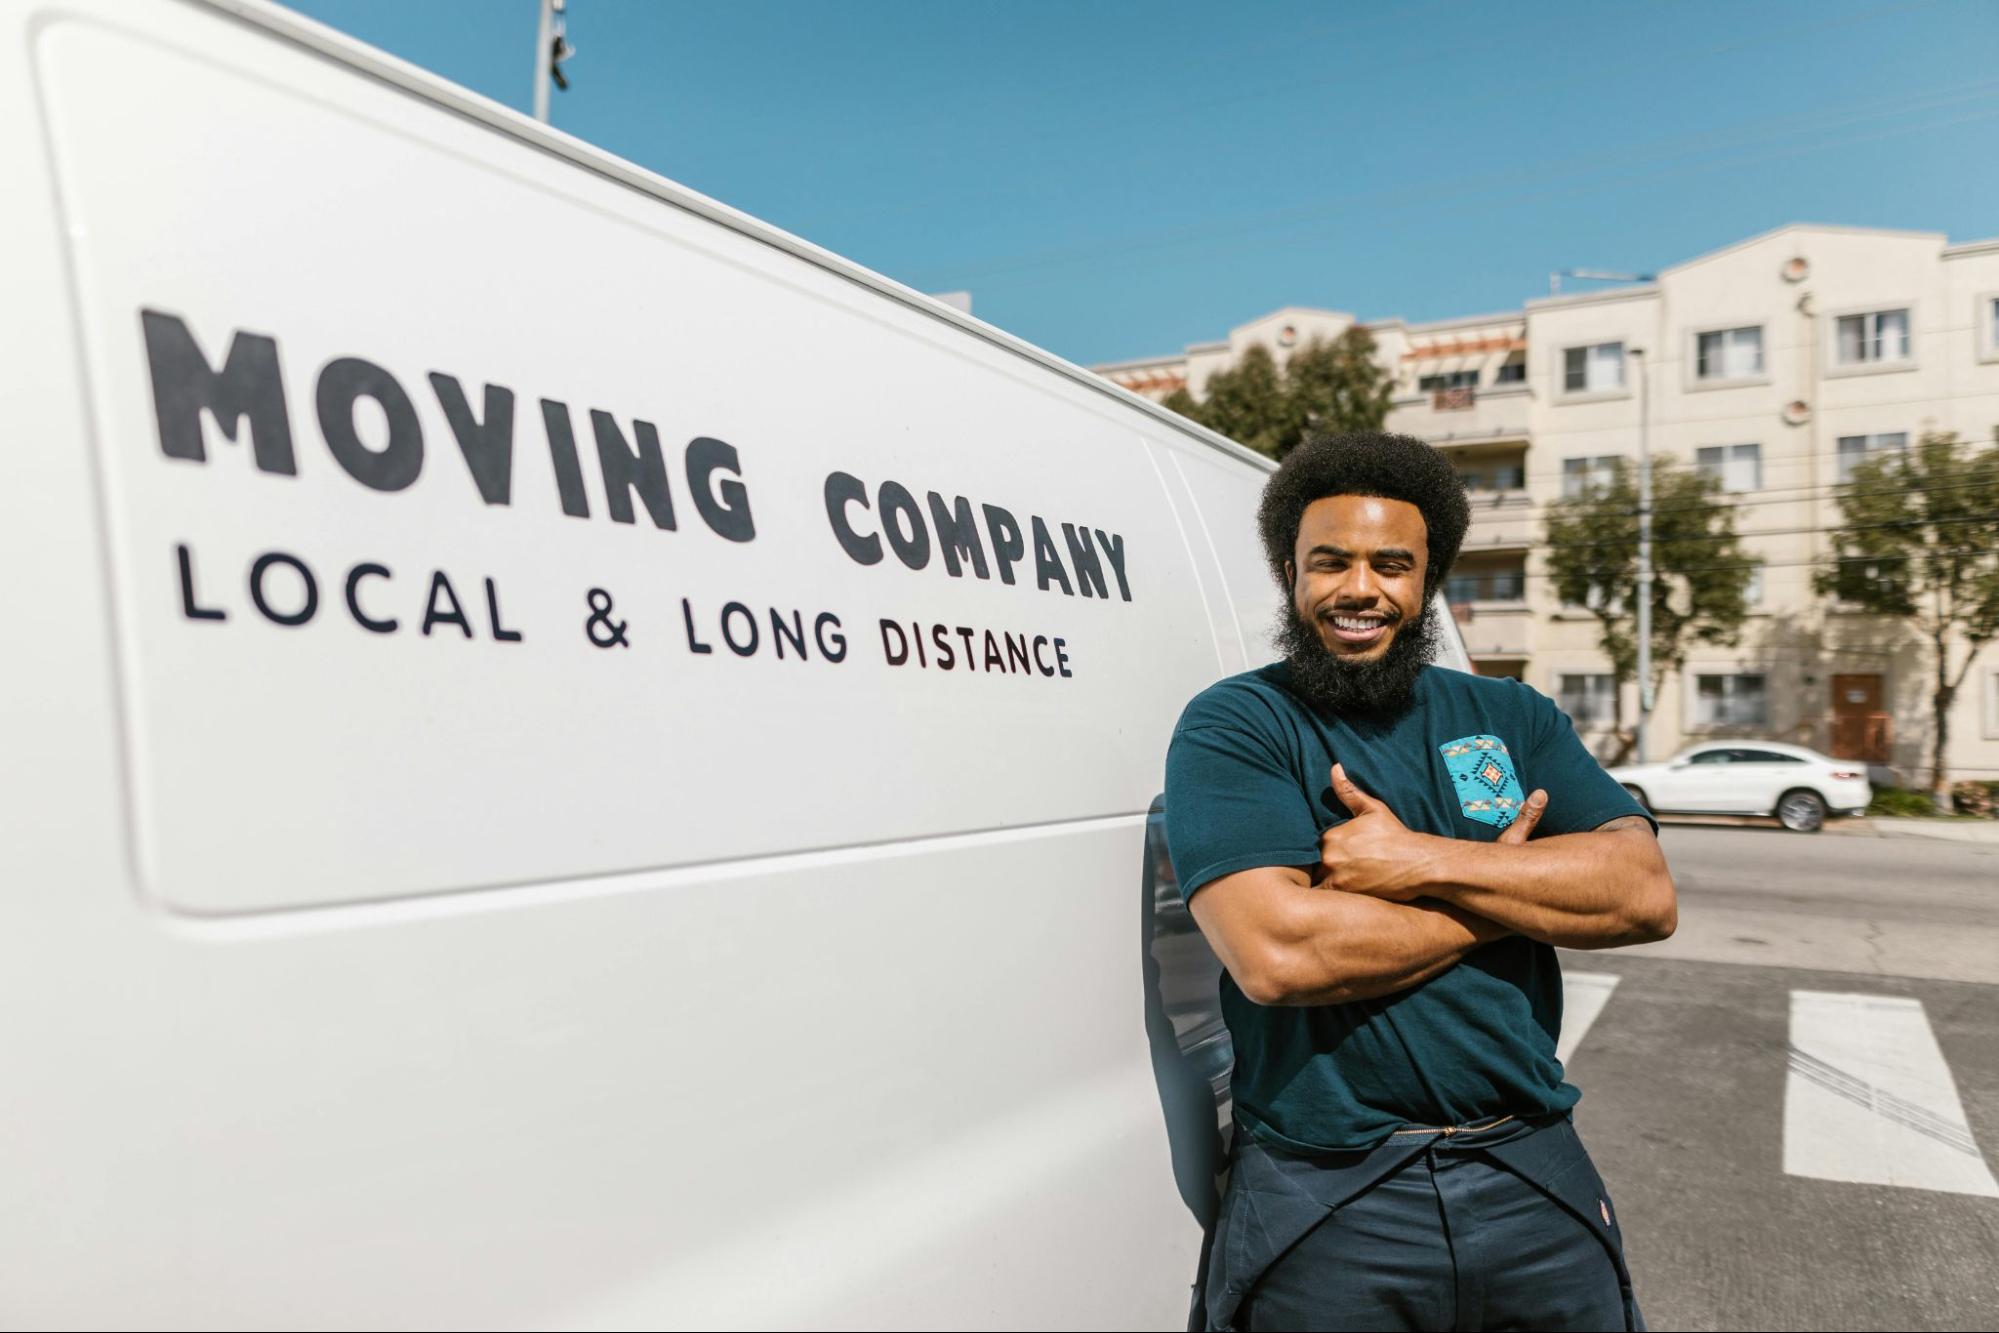 Professional mover standing next to a white moving van.